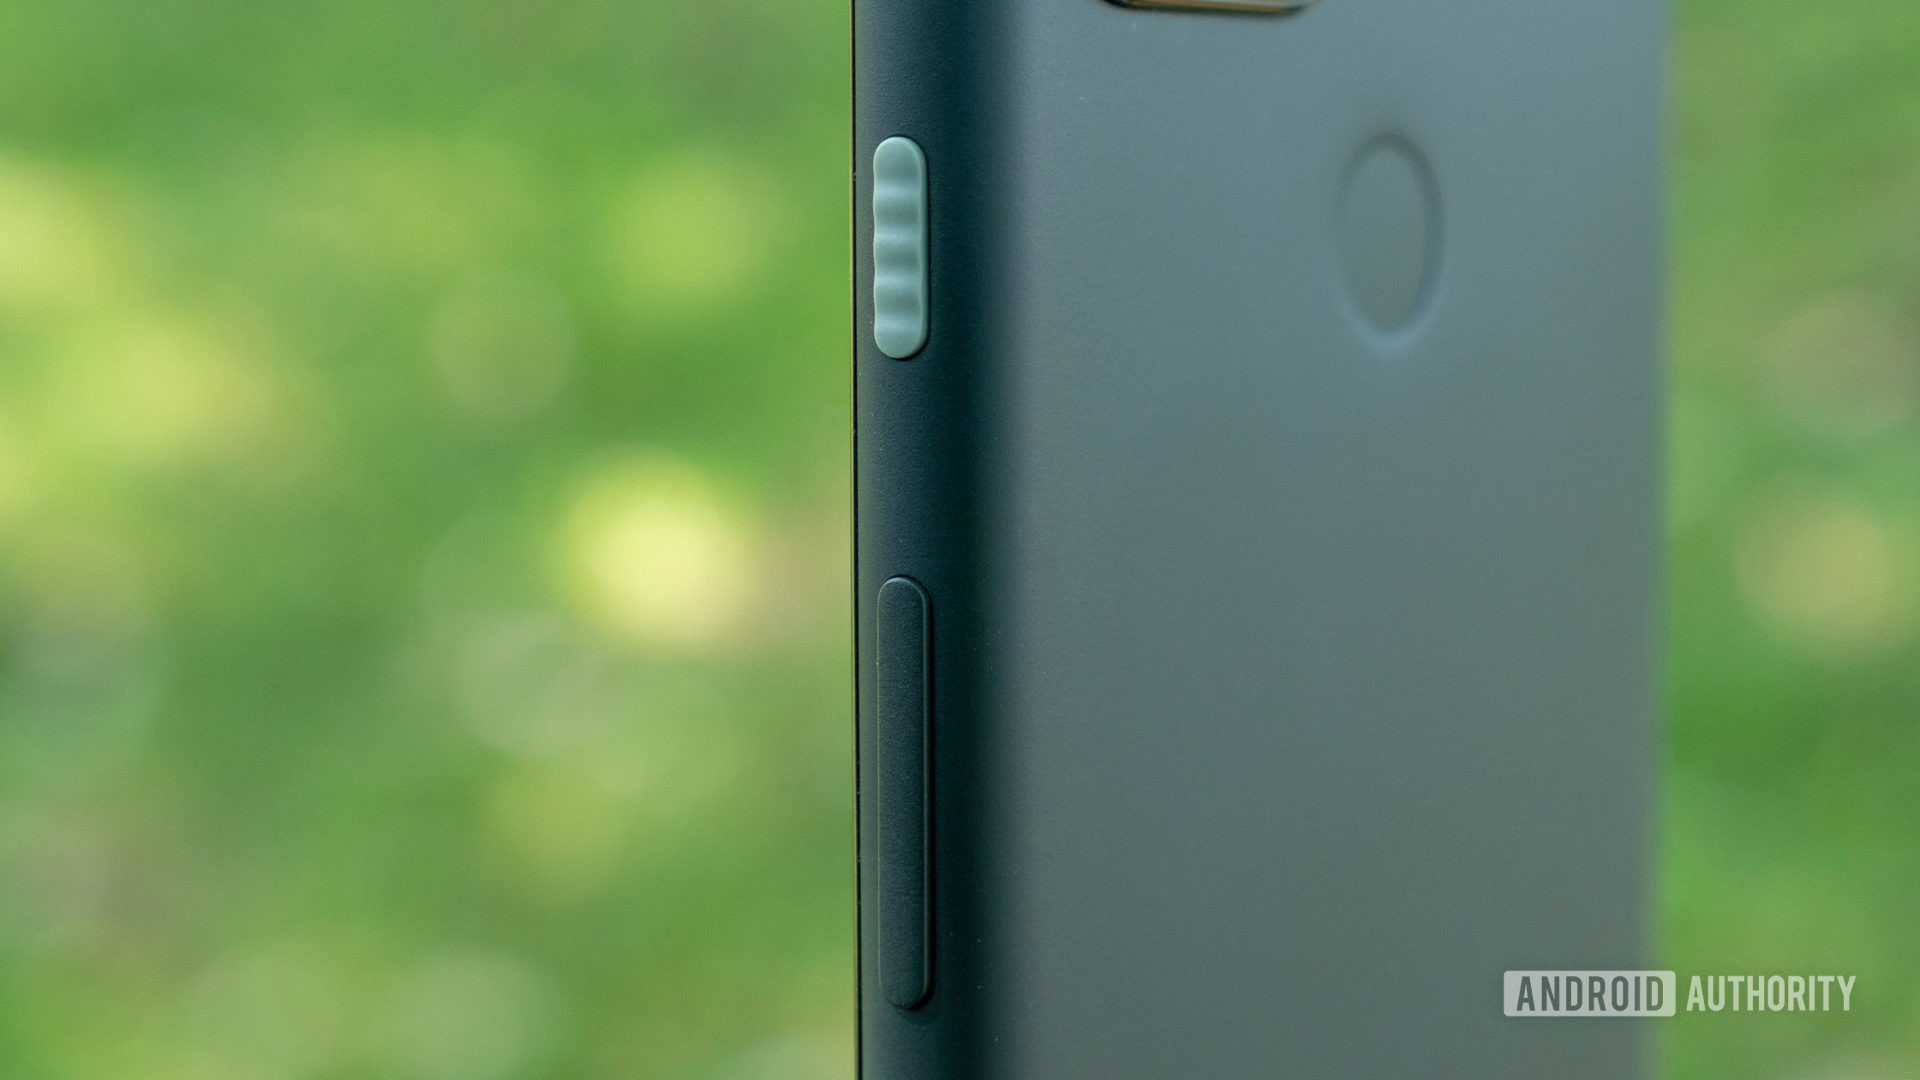 The Google Pixel 5a textured power button and volume keys.